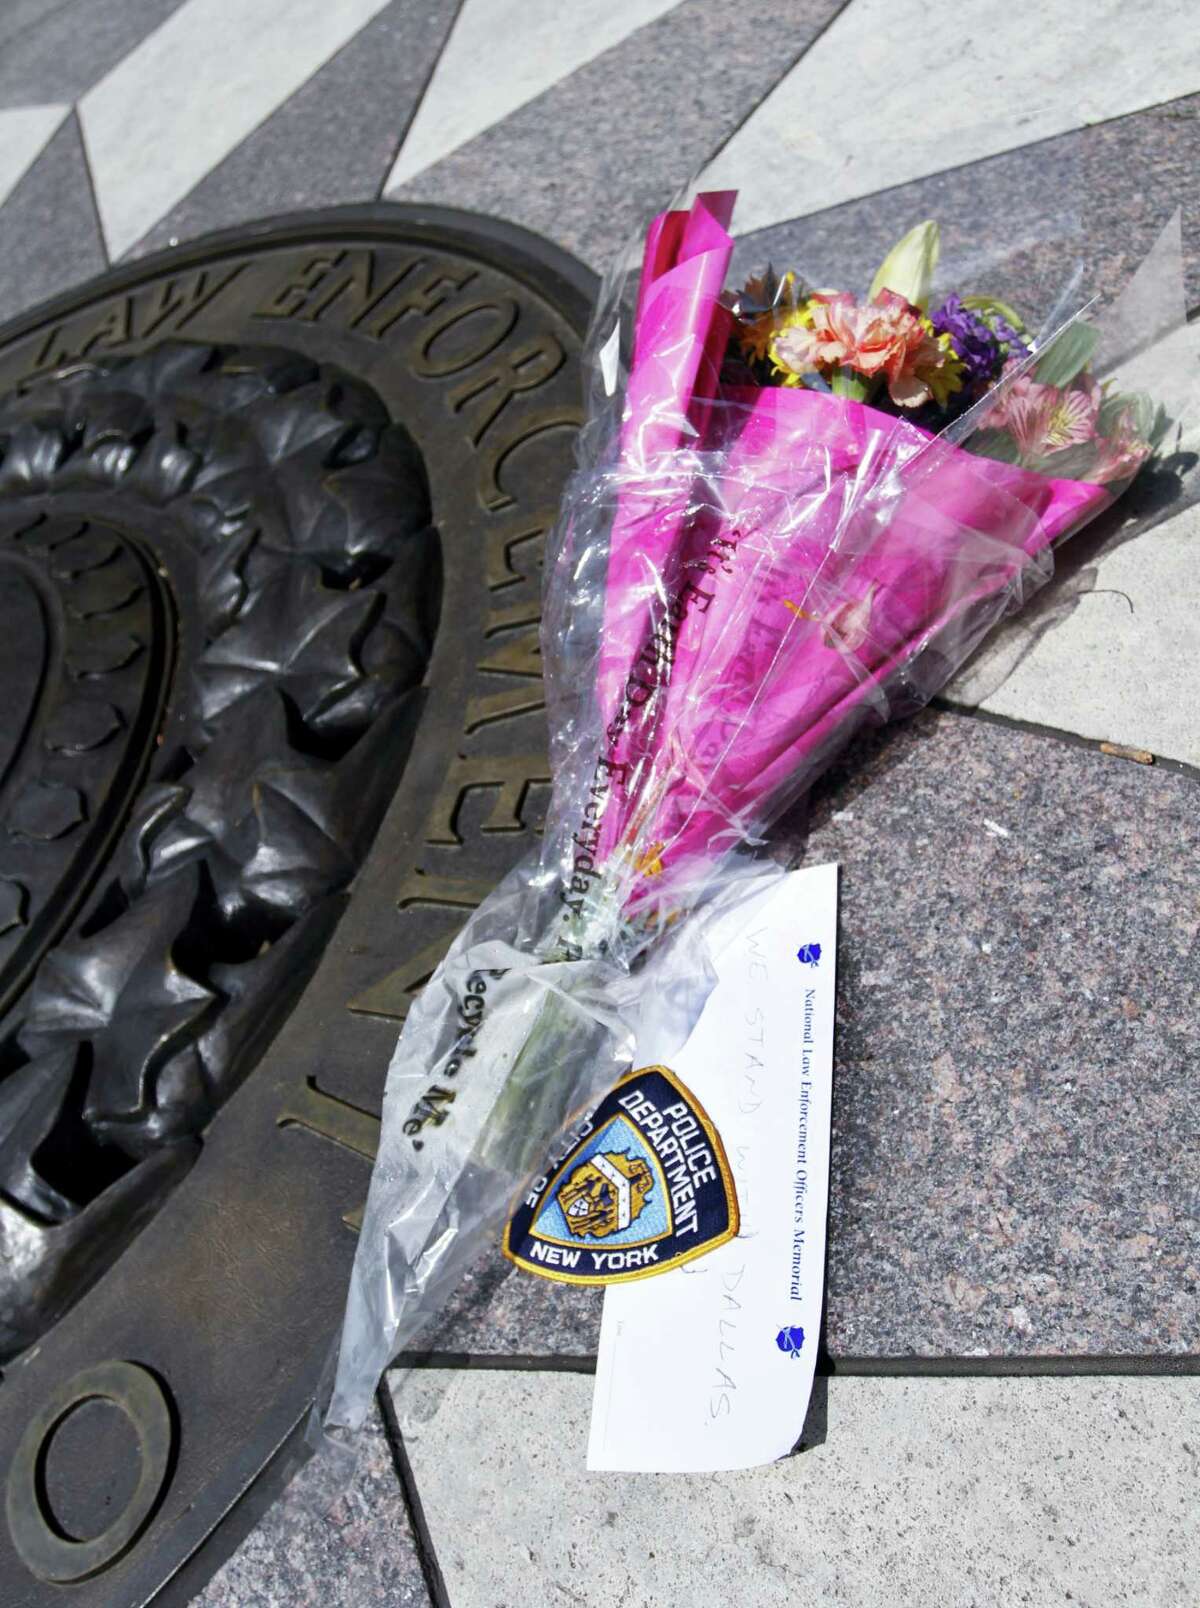 A bouquet of flowers with a note of support for the Dallas Police Department lies on the bronze medallion at the National Law Enforcement Officers Memorial in Washington Friday.